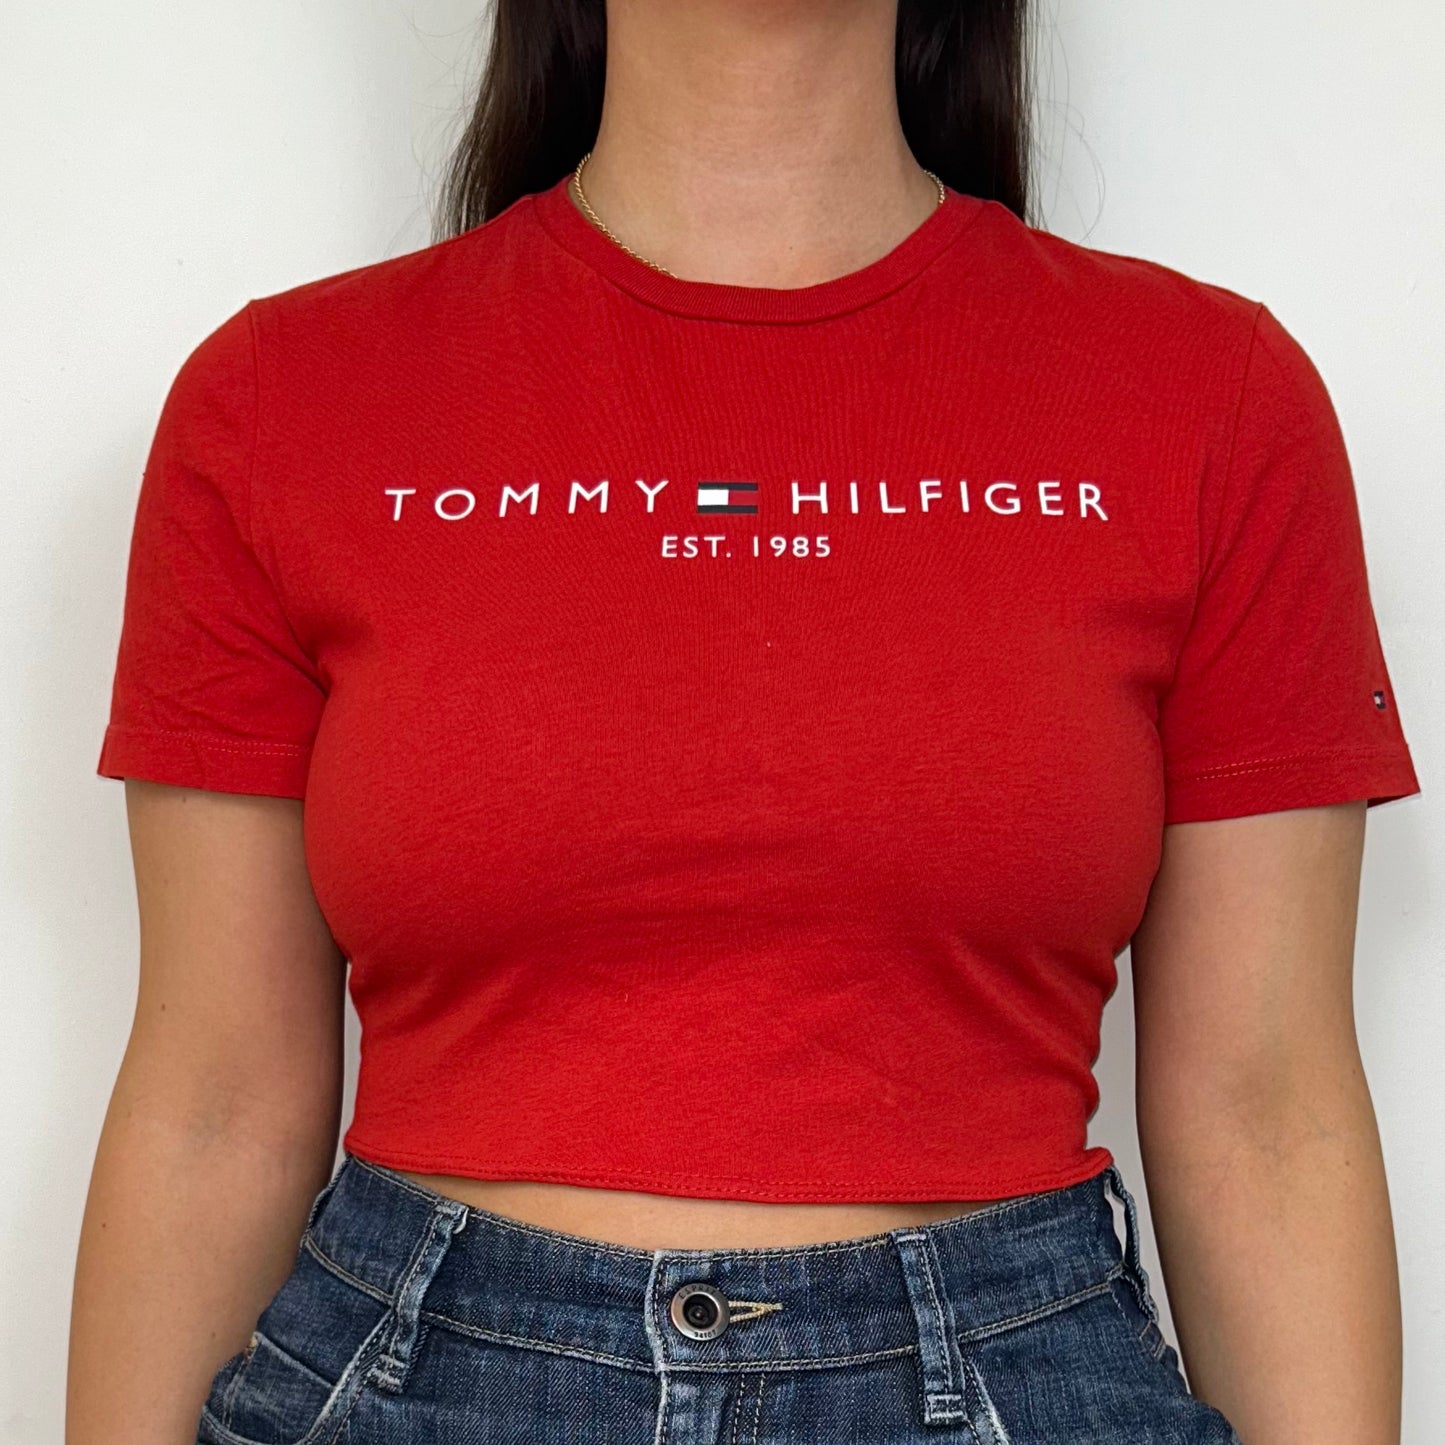 close up of red short sleeve crop top with white tommy hilfiger logo shown on a model wearing a blue denim skirt